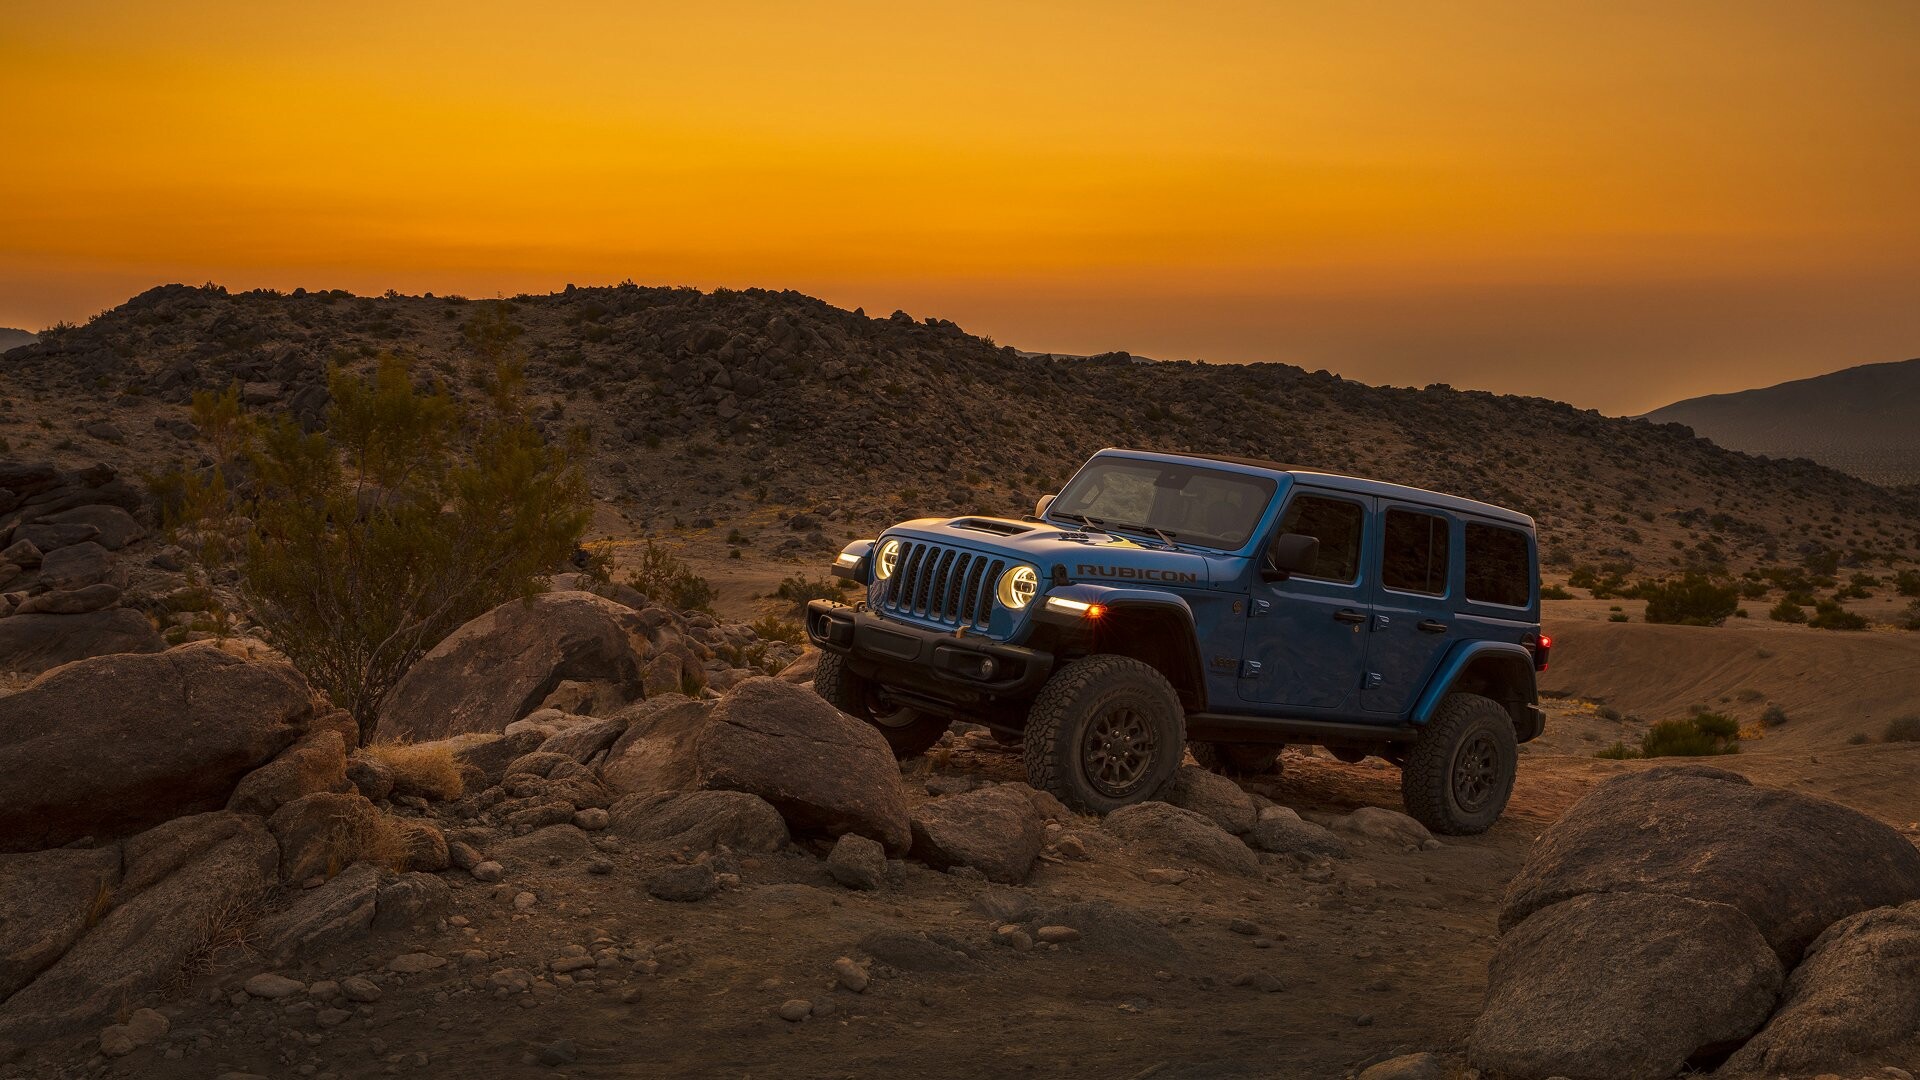 Jeep: Many of Jeep's iconic names are still in production: Wrangler, Cherokee, Grand Cherokee, Gladiator, and soon the return of the Wagoneer and Grand Wagoneer, a three-row luxury SUV expected for the 2022 model year. 1920x1080 Full HD Wallpaper.